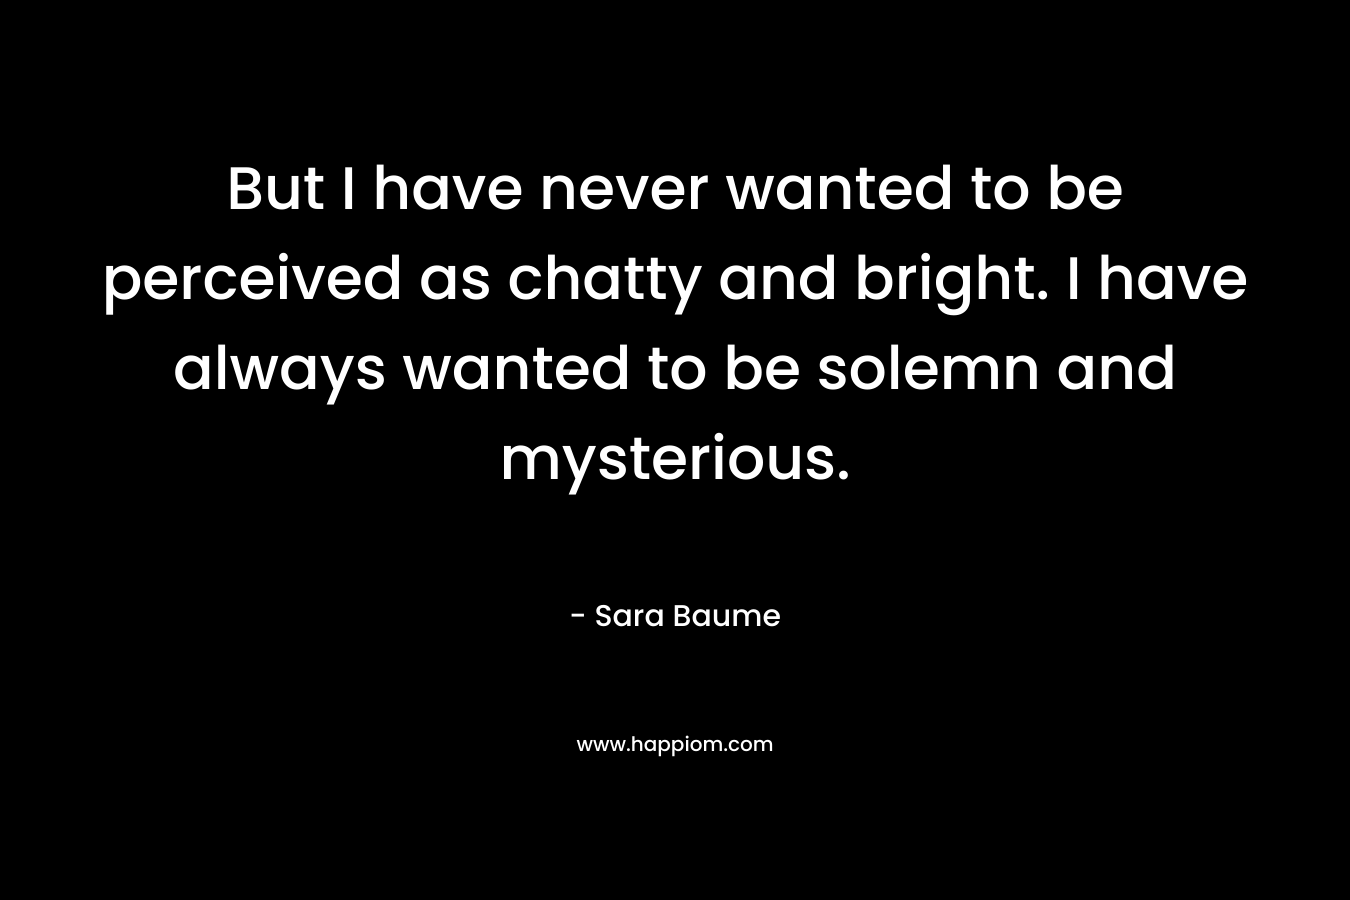 But I have never wanted to be perceived as chatty and bright. I have always wanted to be solemn and mysterious. – Sara Baume